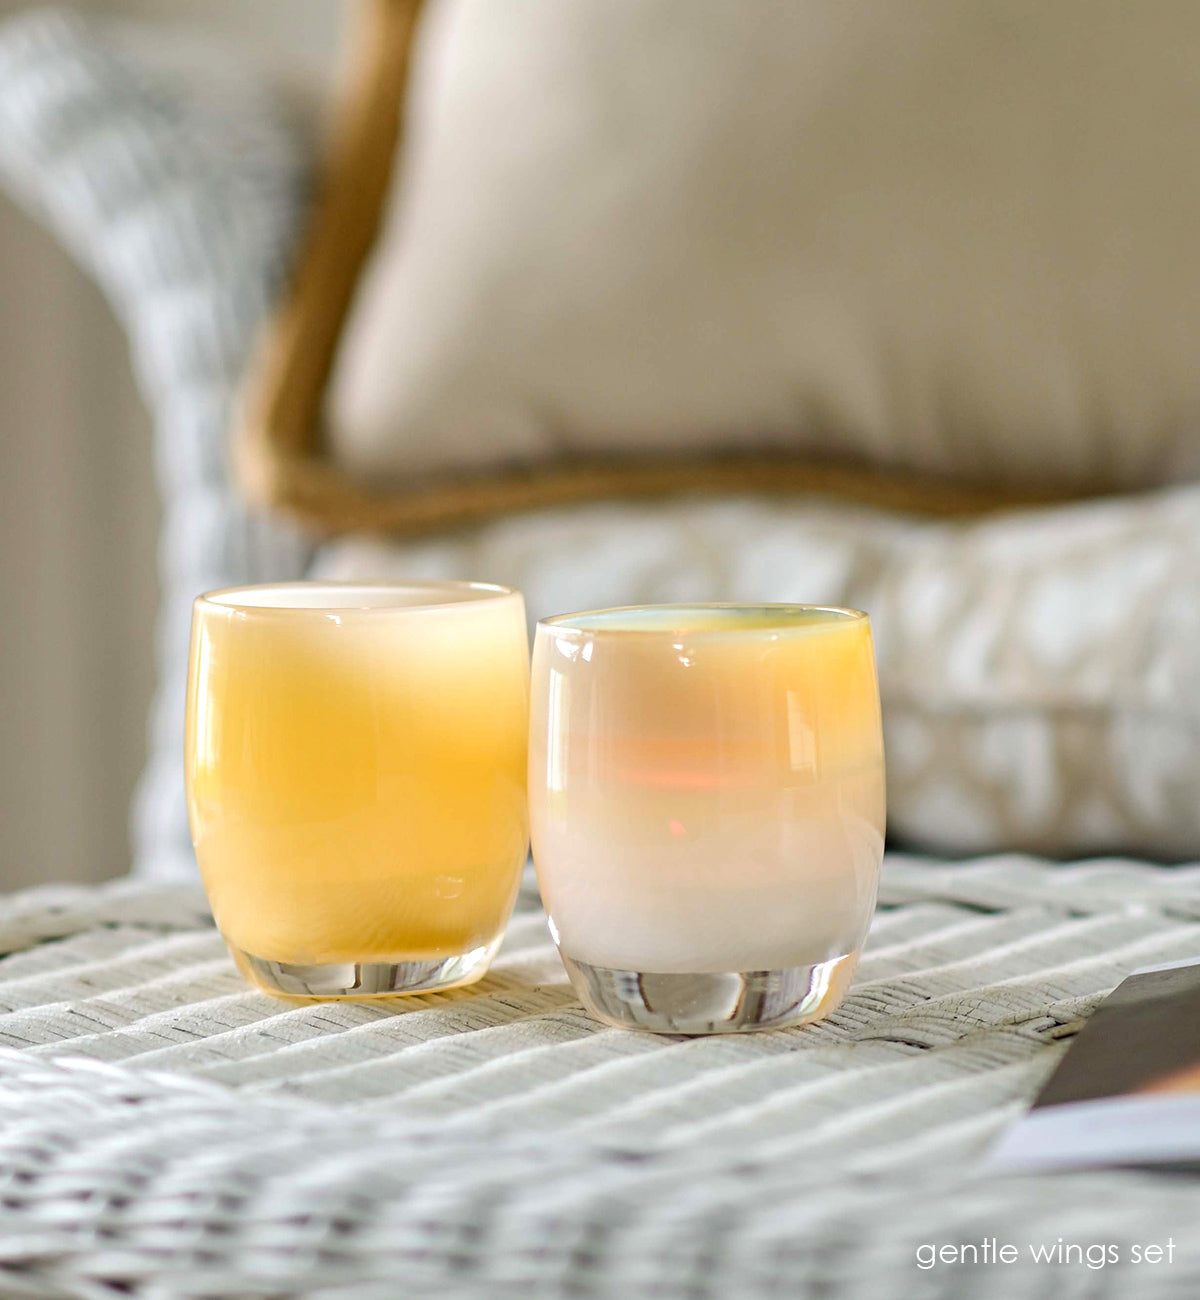 gentle wings set, angel and comfort hand-blown pale yellow set of two, hand-blown glass votive candle holders